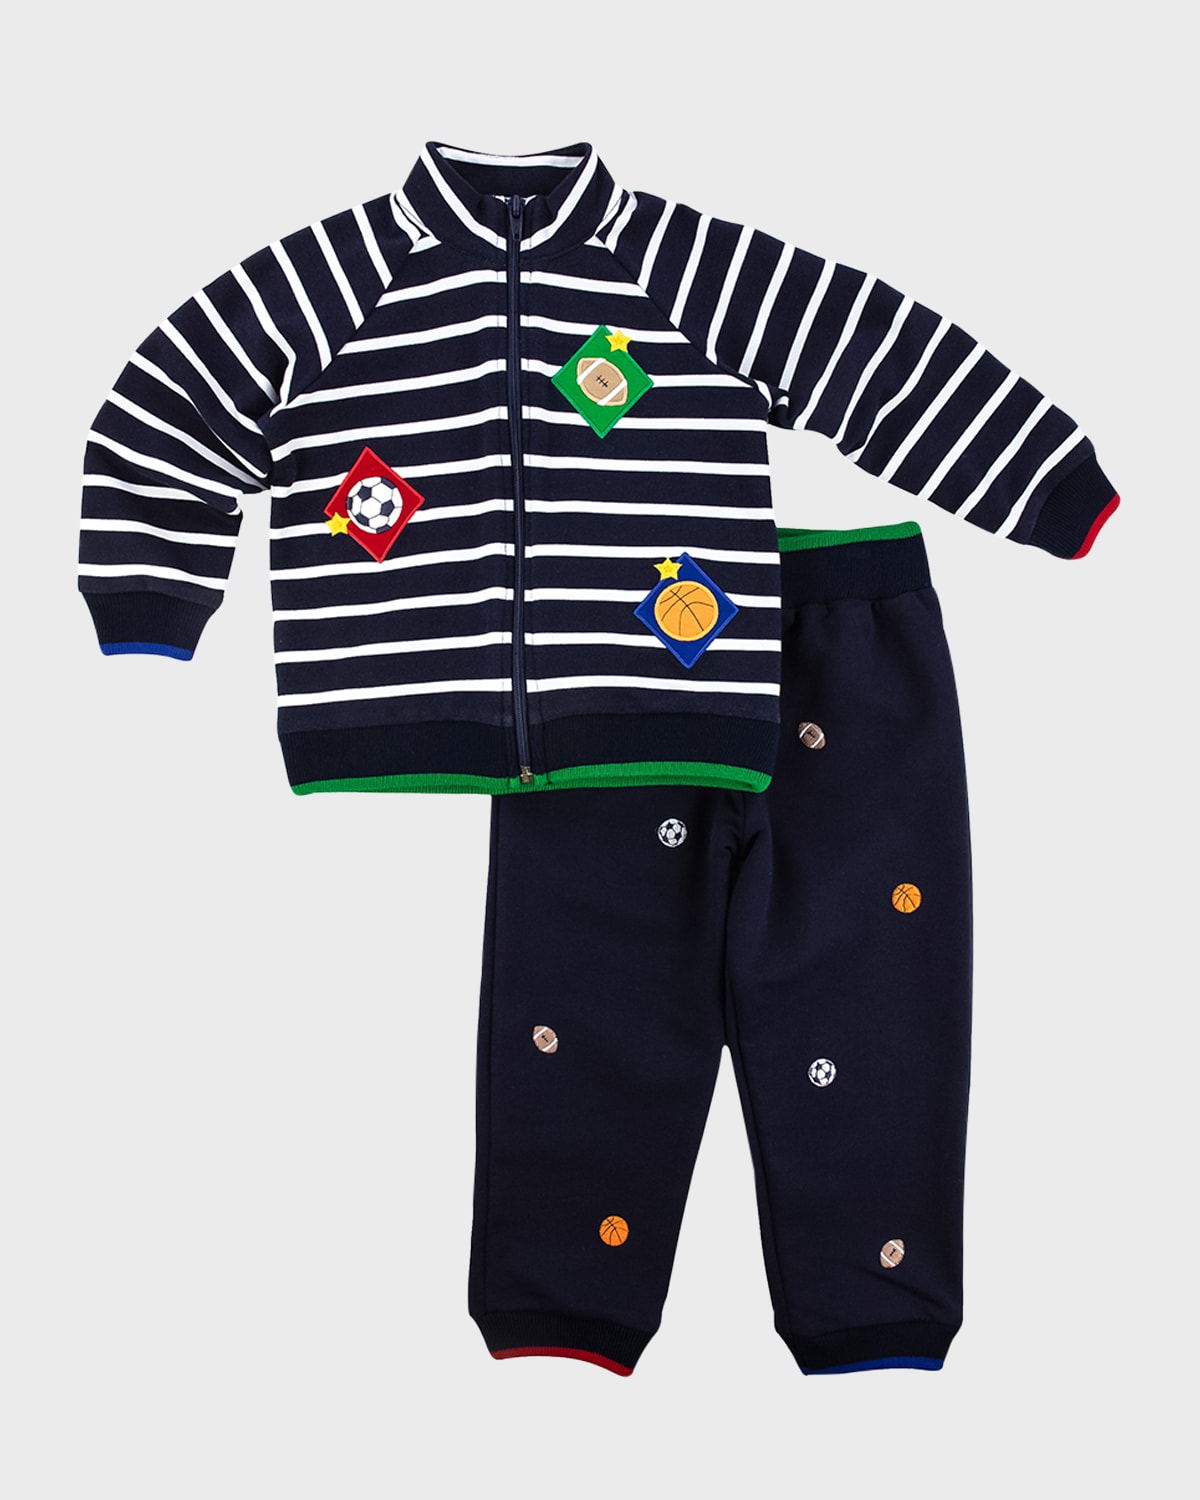 Boy's Striped Embroidered Sports Balls Jacket & Pants, Size 12M-4